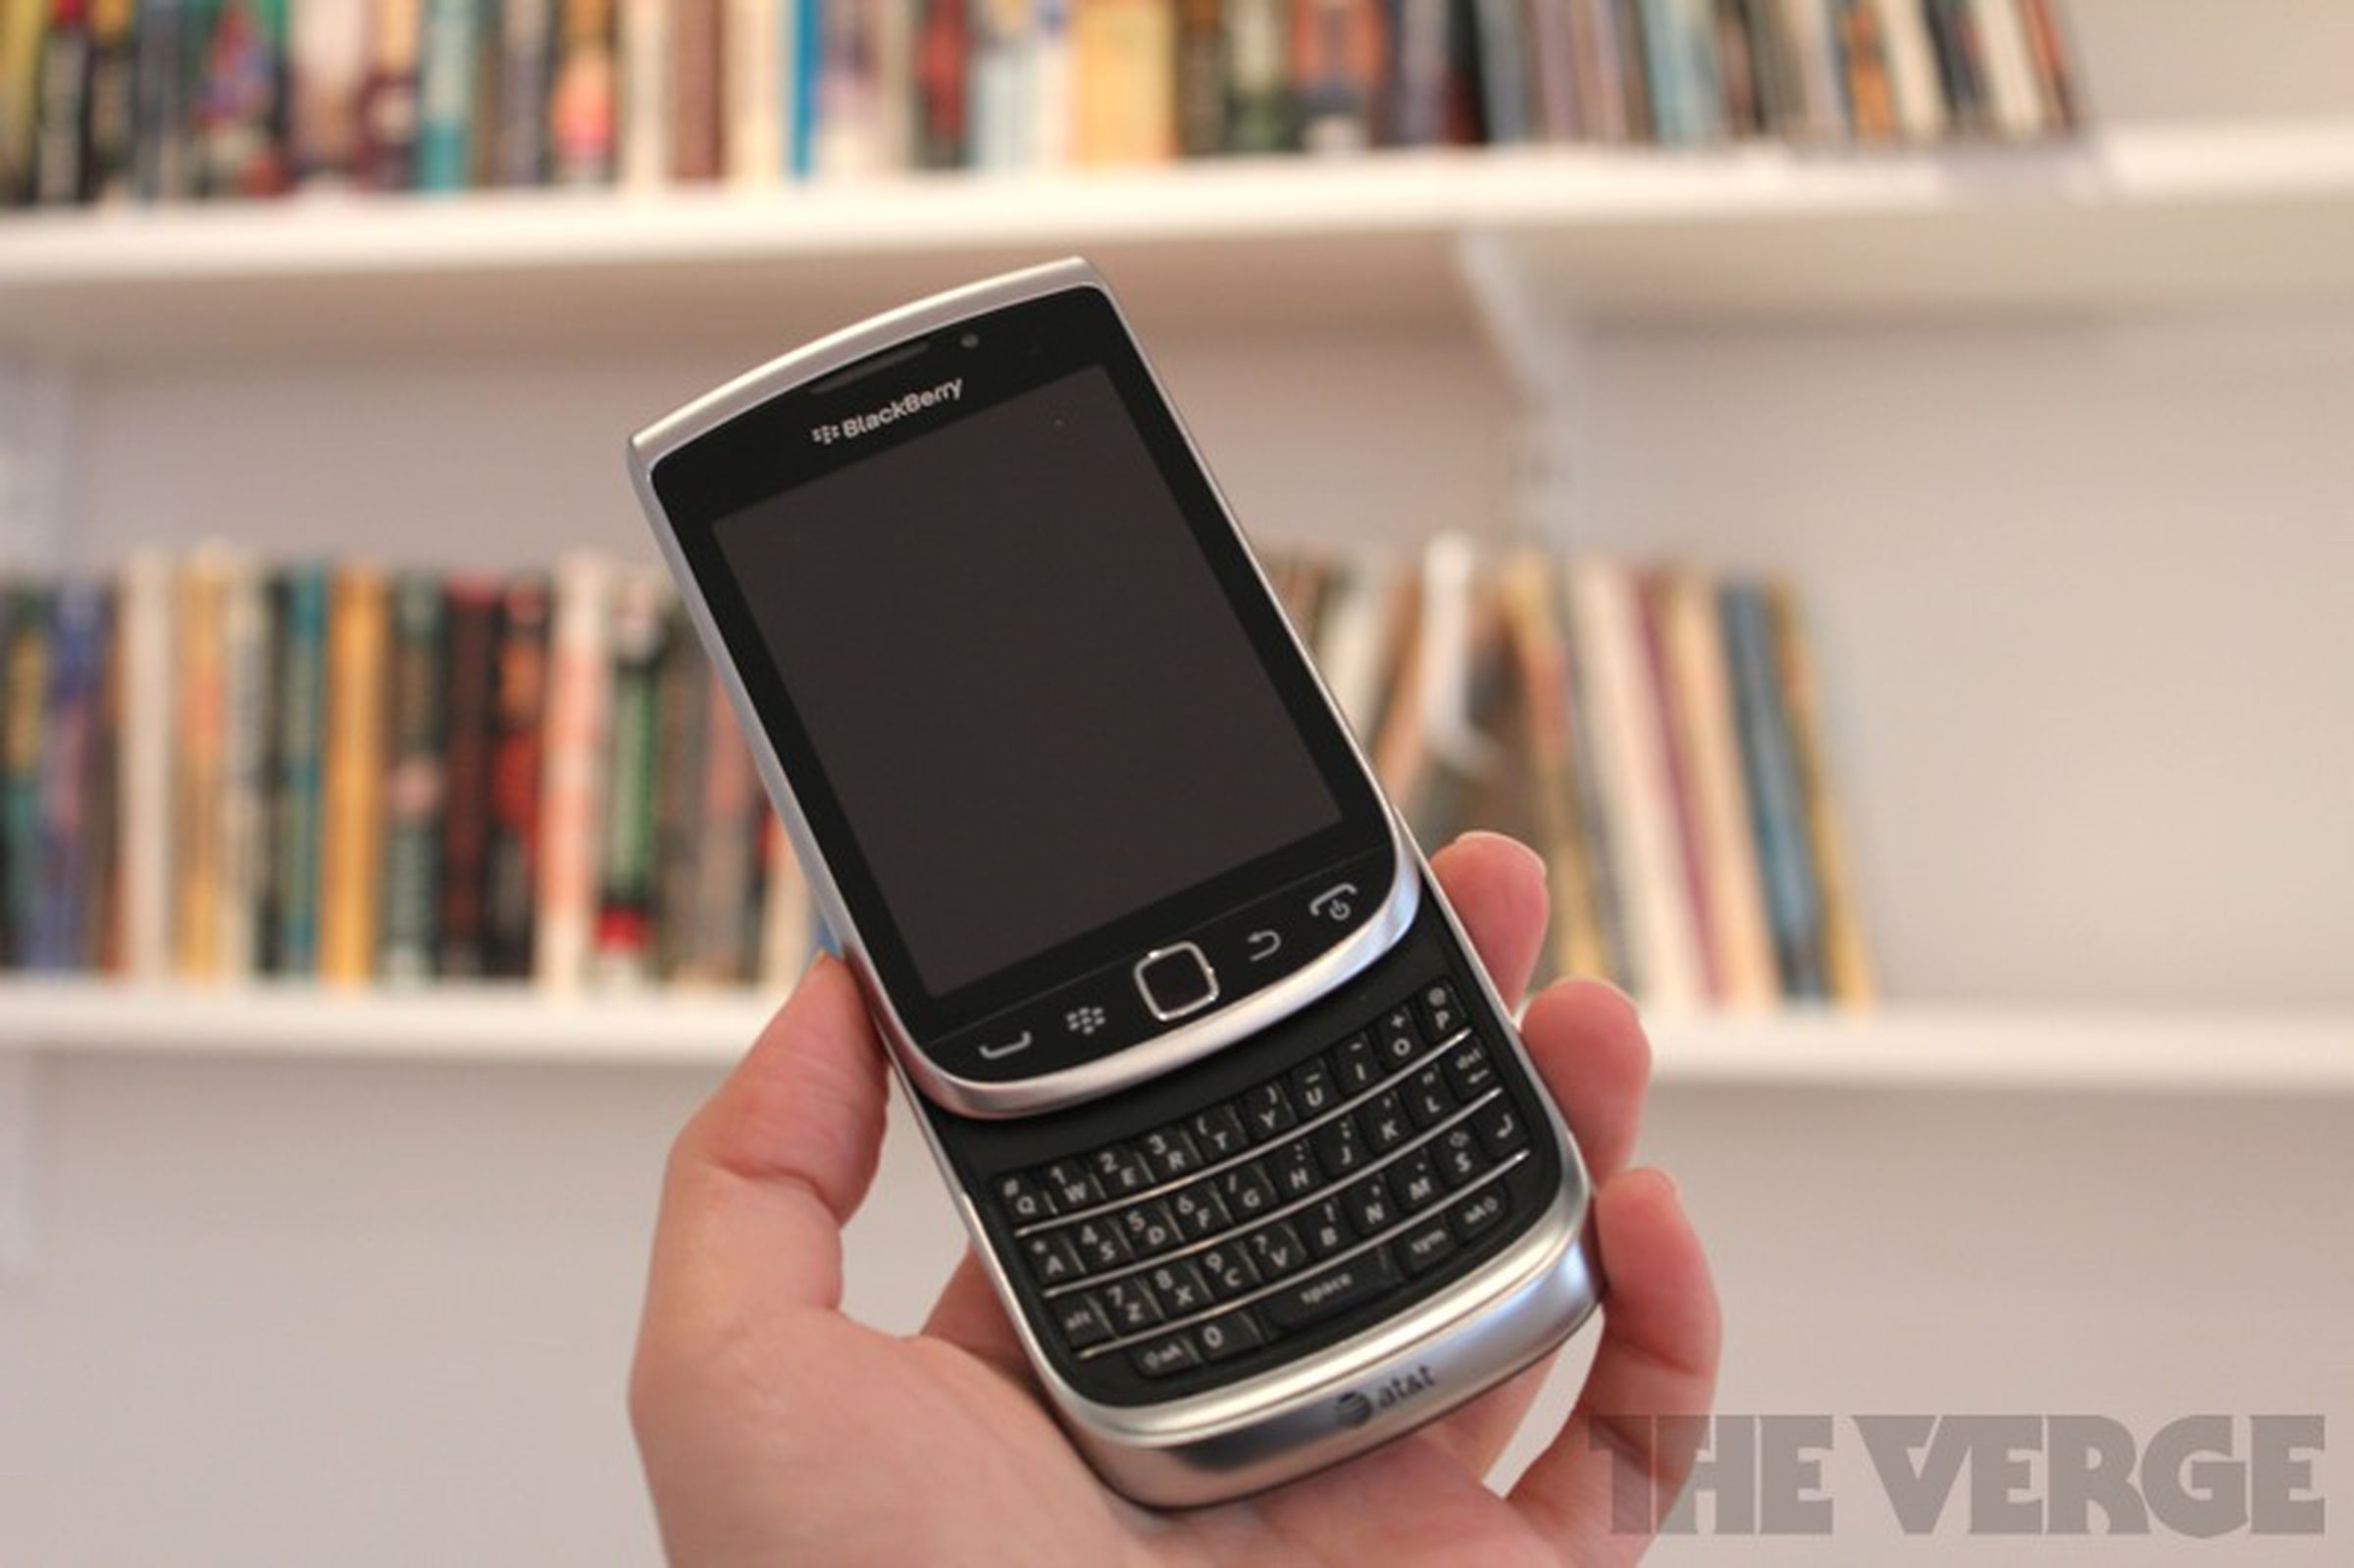 BlackBerry Torch 9810 review 